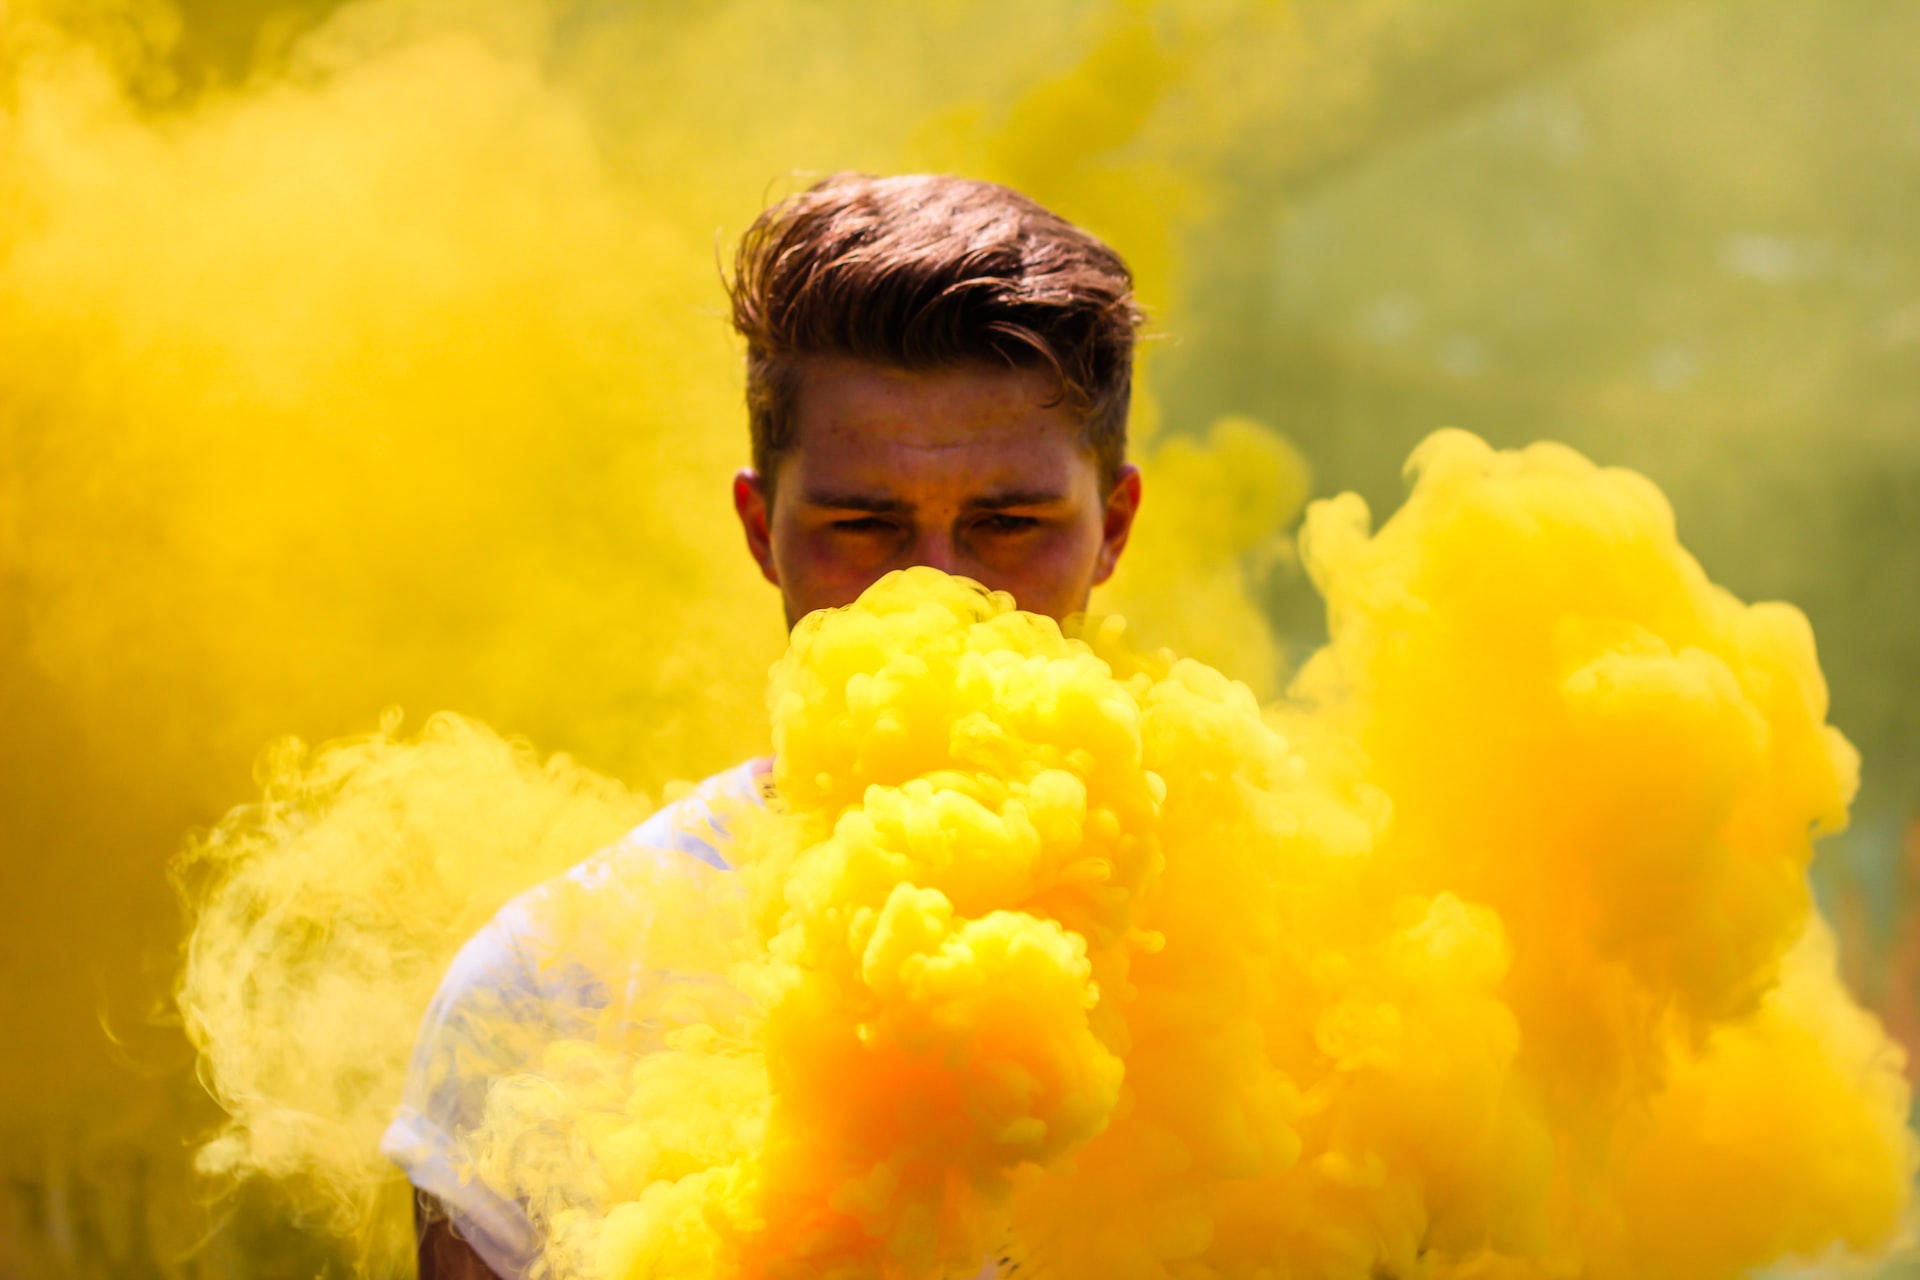 Man being hidden behind a plume of yellow smoke from a flare